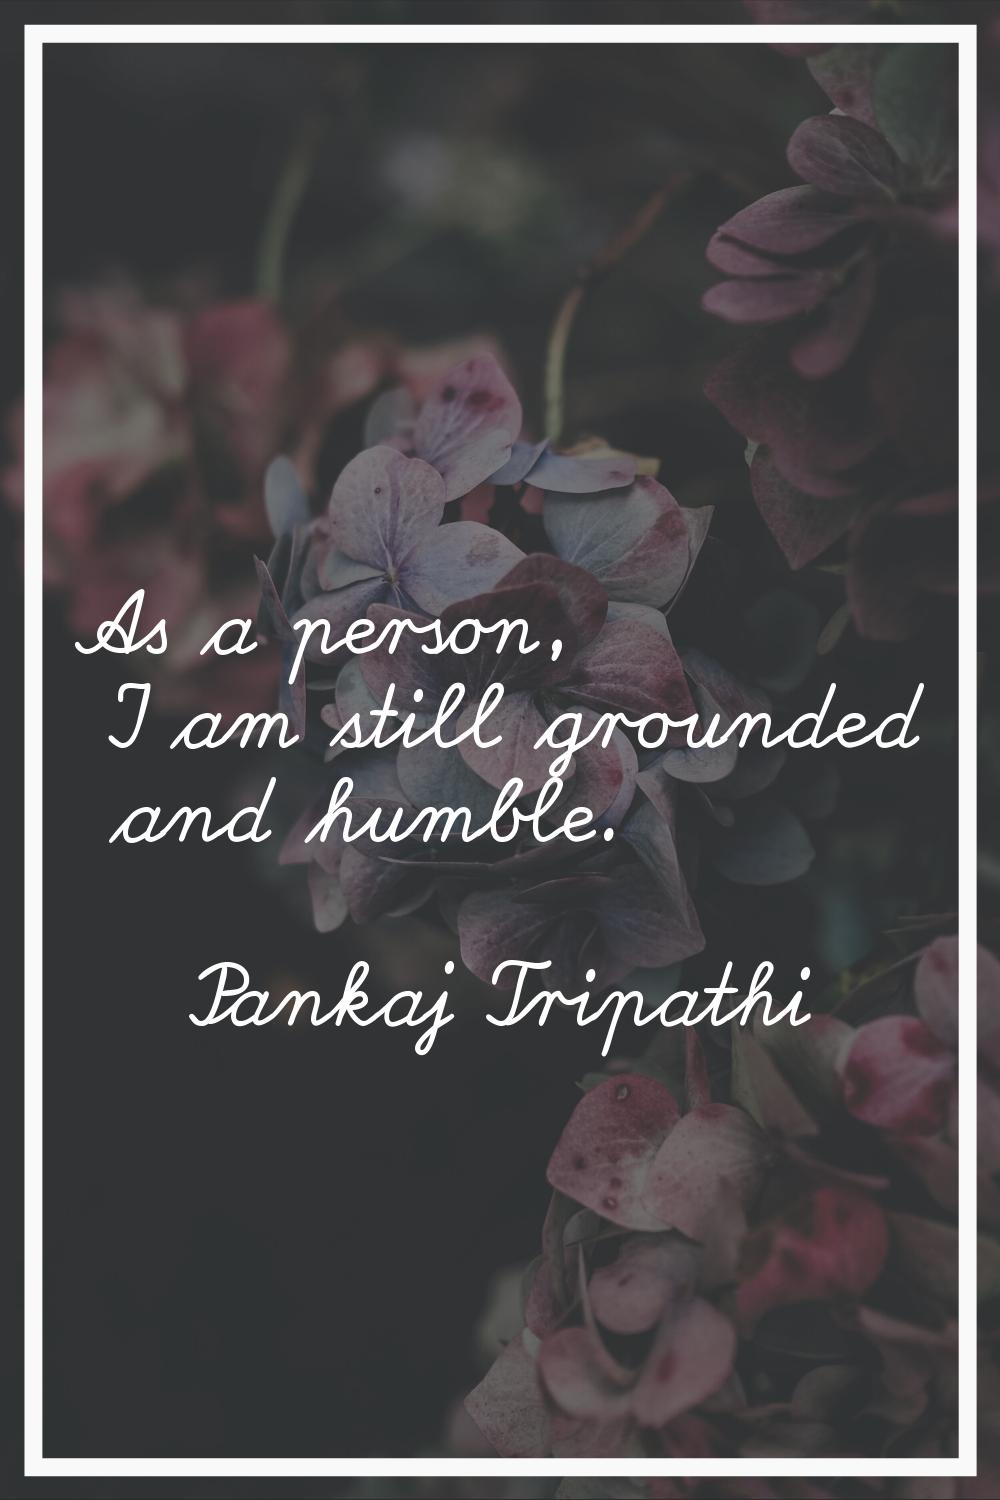 As a person, I am still grounded and humble.